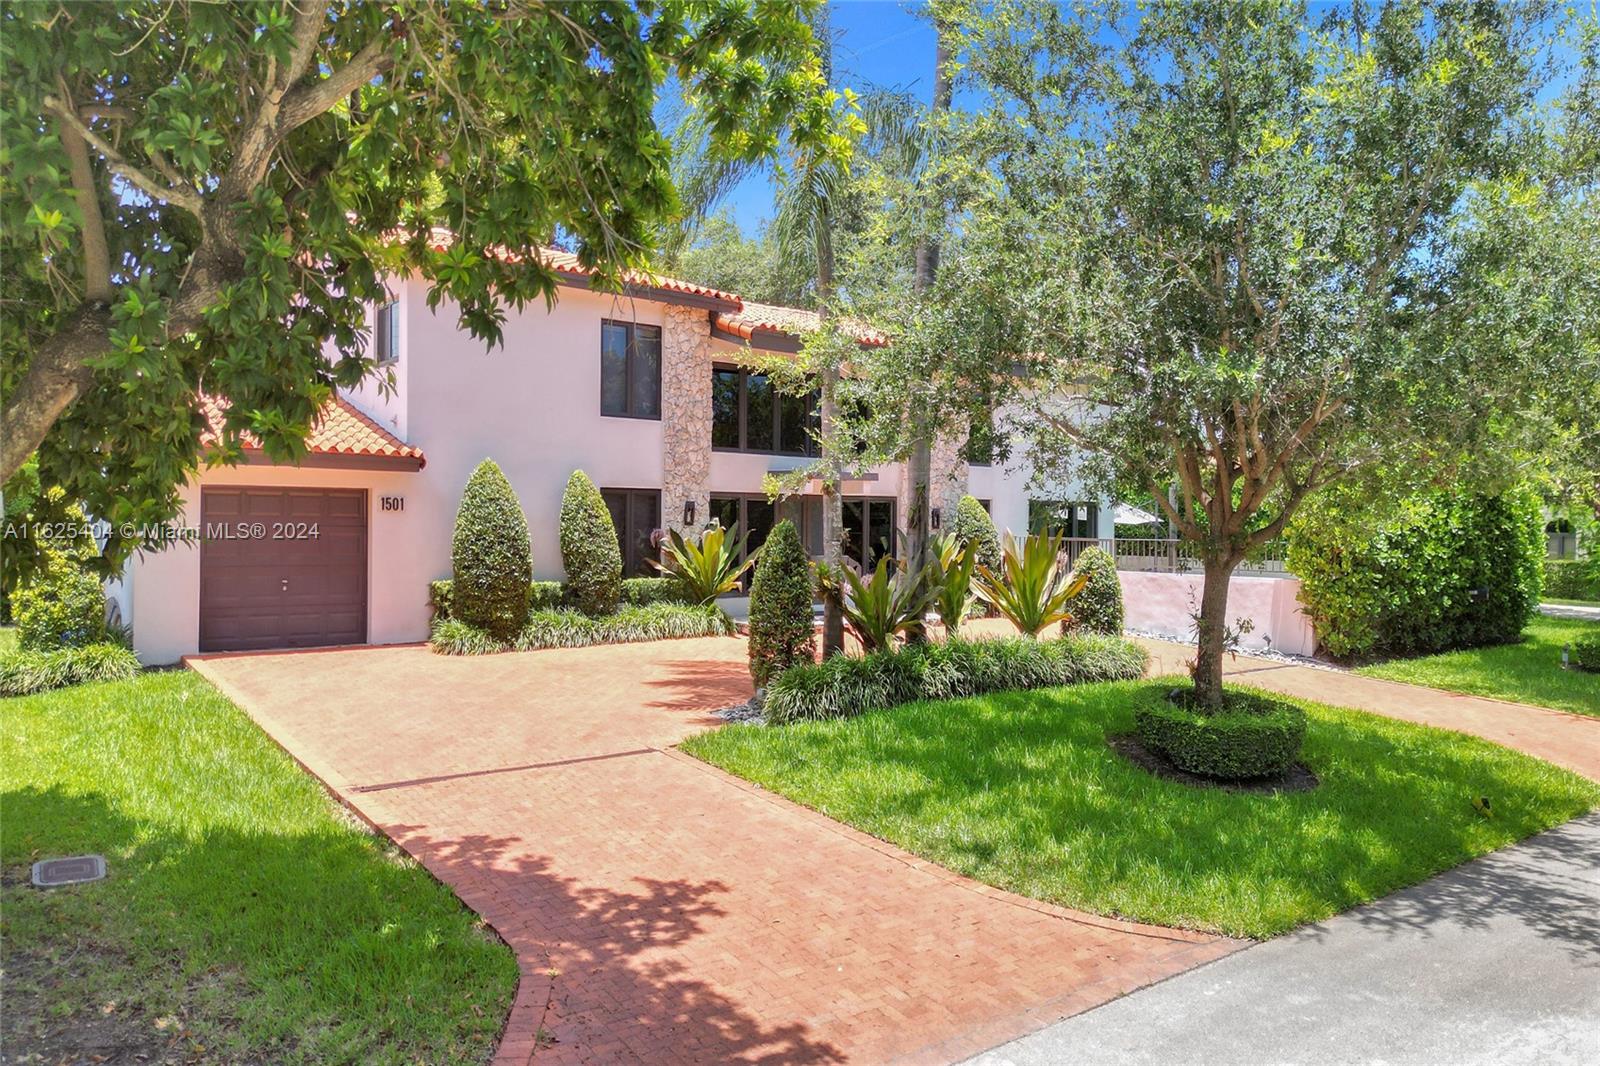 BEST DEAL in Coral Gables! Recently appraised at $2,081,000!! INSTANT EQUITY!  Renovated 2-story home in the heart of Coral Gables Country Club / Biltmore area. 4 Beds 3 Baths, over 3,000 sqft on a privately fenced double wide corner lot. The interior boasts 18' vaulted ceilings with exposed wooden beams, updated baths with marble/porcelain finishes. Gourmet Italian kitchen features Bosch appliances, Toscana Carrara quartz countertops with waterfall design. Premium 32 by 32 Toscana Carrara porcelain flooring throughout. Bar area with blue marble countertop is perfect for entertaining! Impact windows & doors. Turfed backyard! Large circle driveway allows for plenty of parking. 1 car garage used as 4th Bedroom. Tenant till Feb 15th. Call listing agent for the most accurate information!